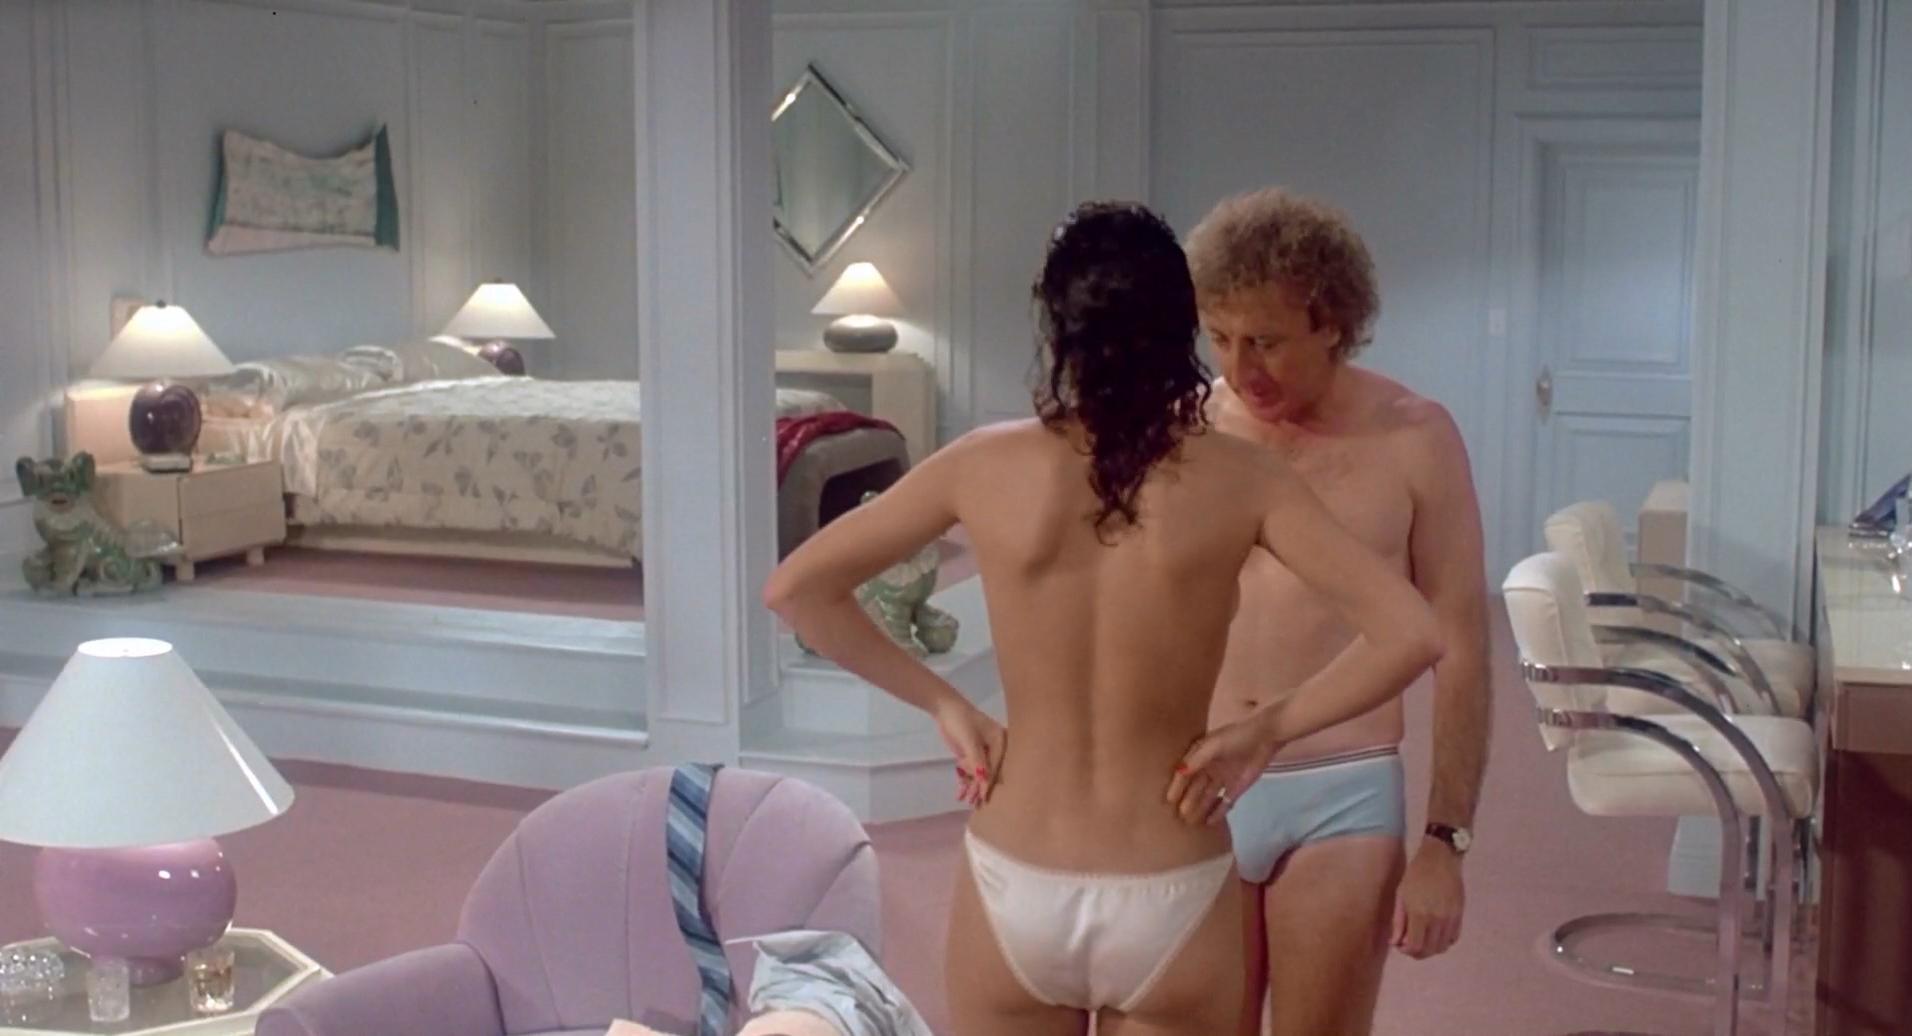 Kelly lebrock nude pictures